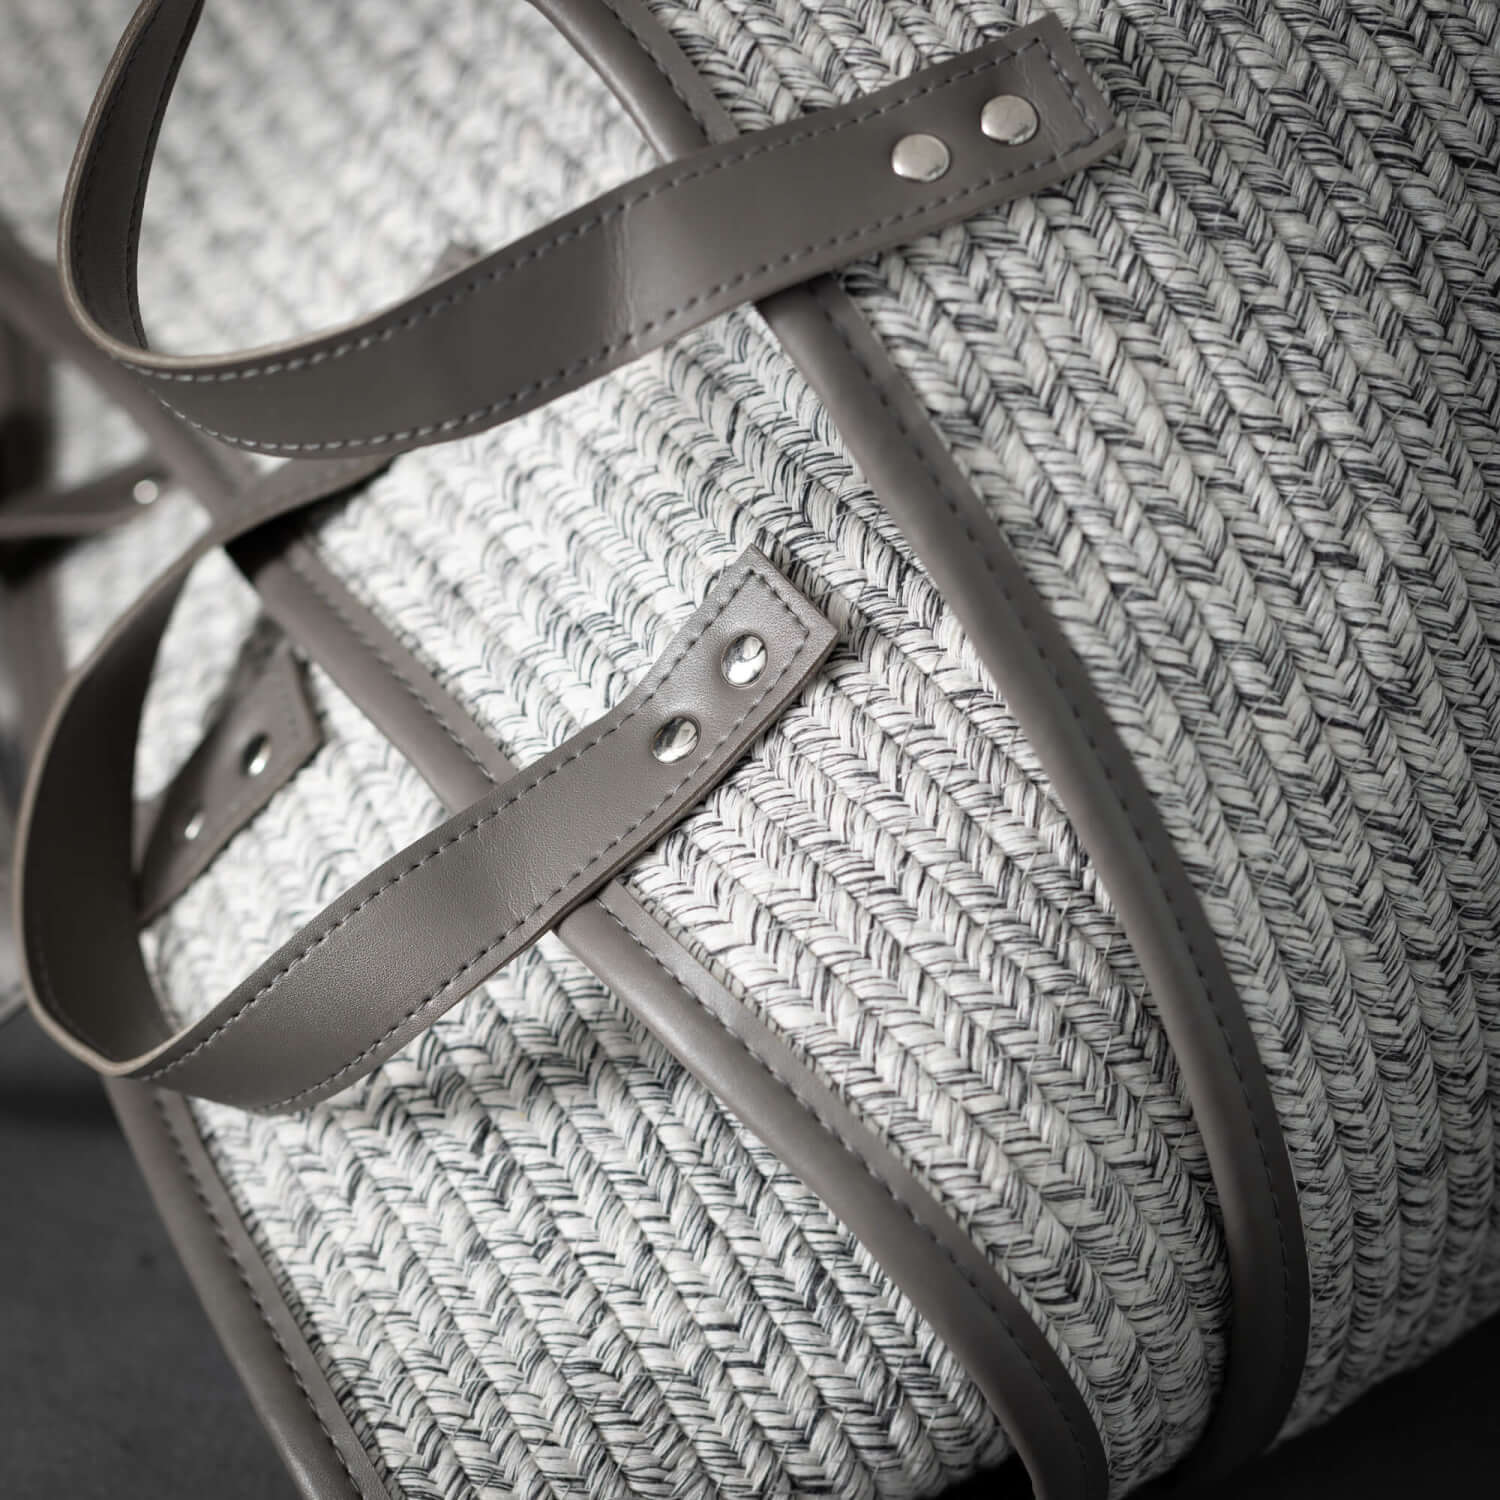 close up view of all three sizes of stacked dove gray woven textile baskets